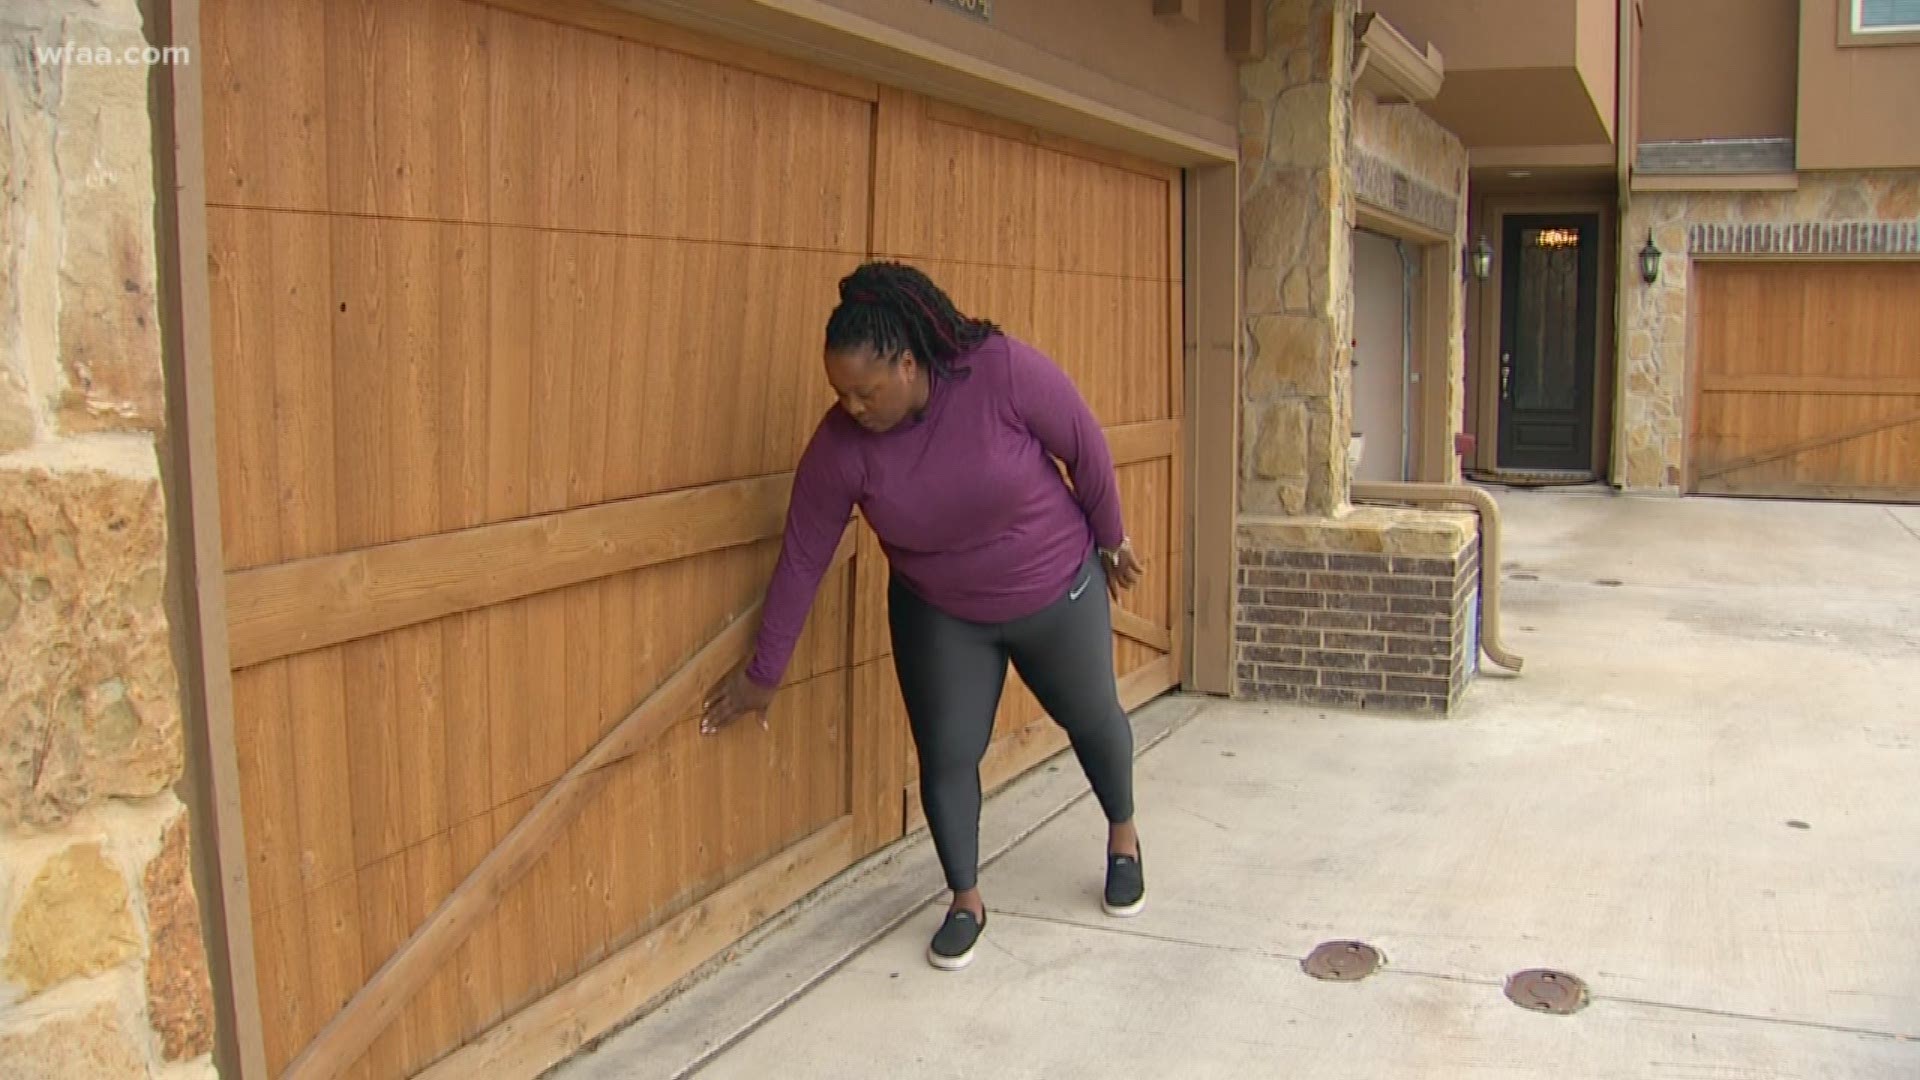 Michelle Carter’s Ford has been stuck in the garage for six weeks after an Amazon driver hit and broke her garage while delivering a package to her neighbor.